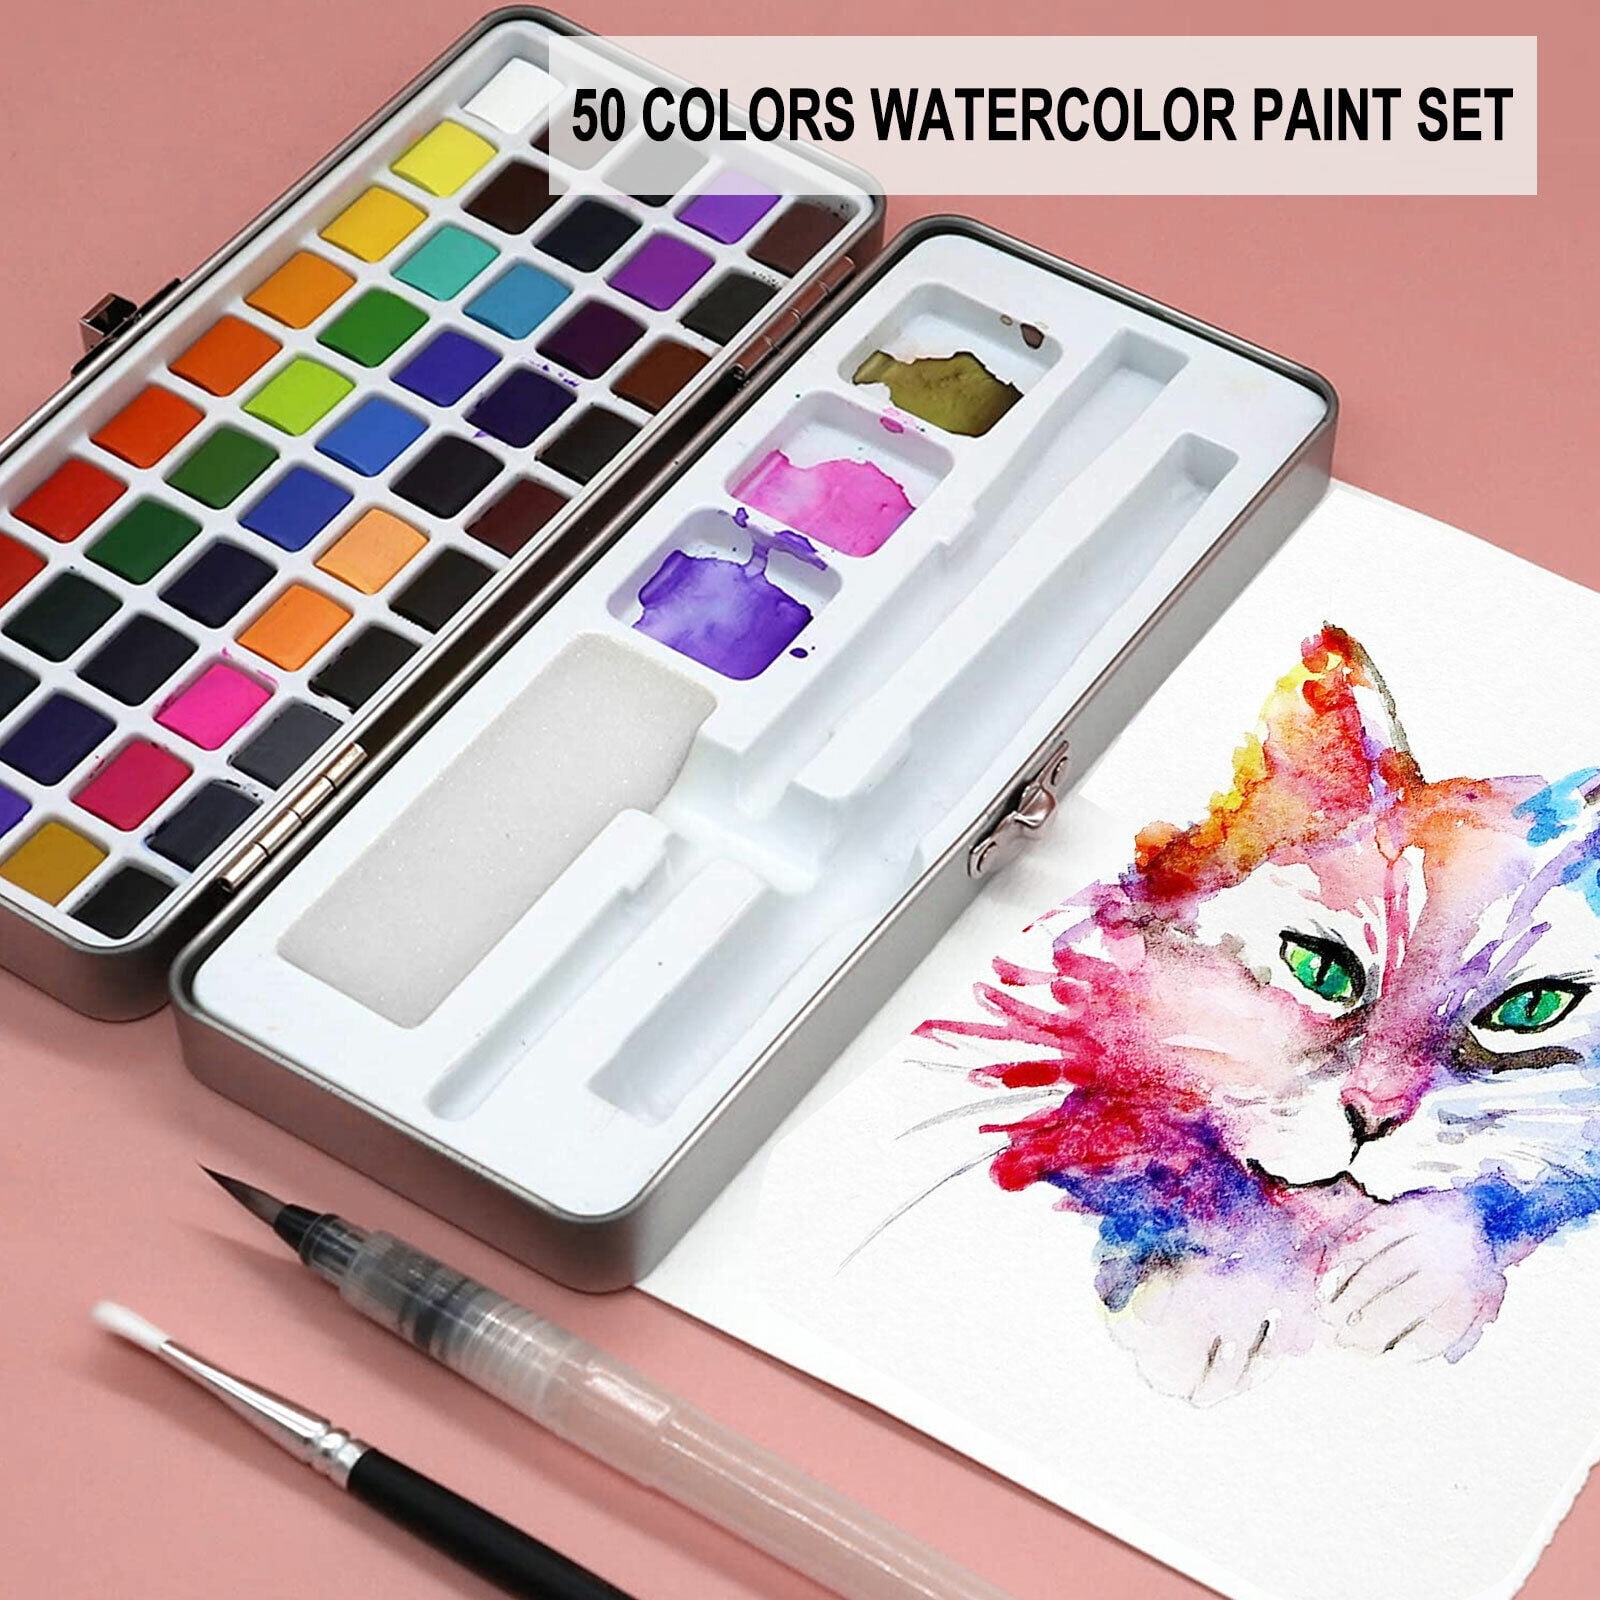 Jdefeg Crafts for Girls Ages 8-12 Painting Paint Water Set Paints Watercolor Watercolor Set Brush Paint Solid Home DIY Stationary Supplies B One size